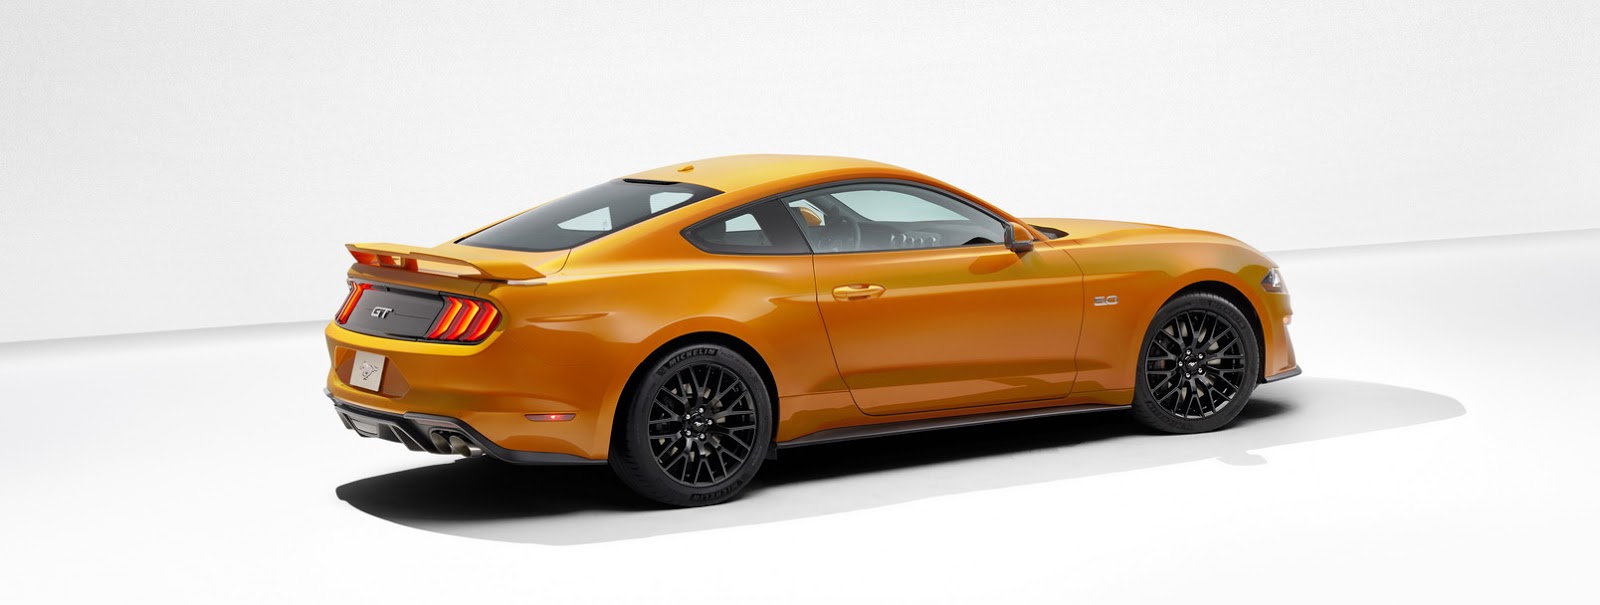 2018 Ford Mustang side